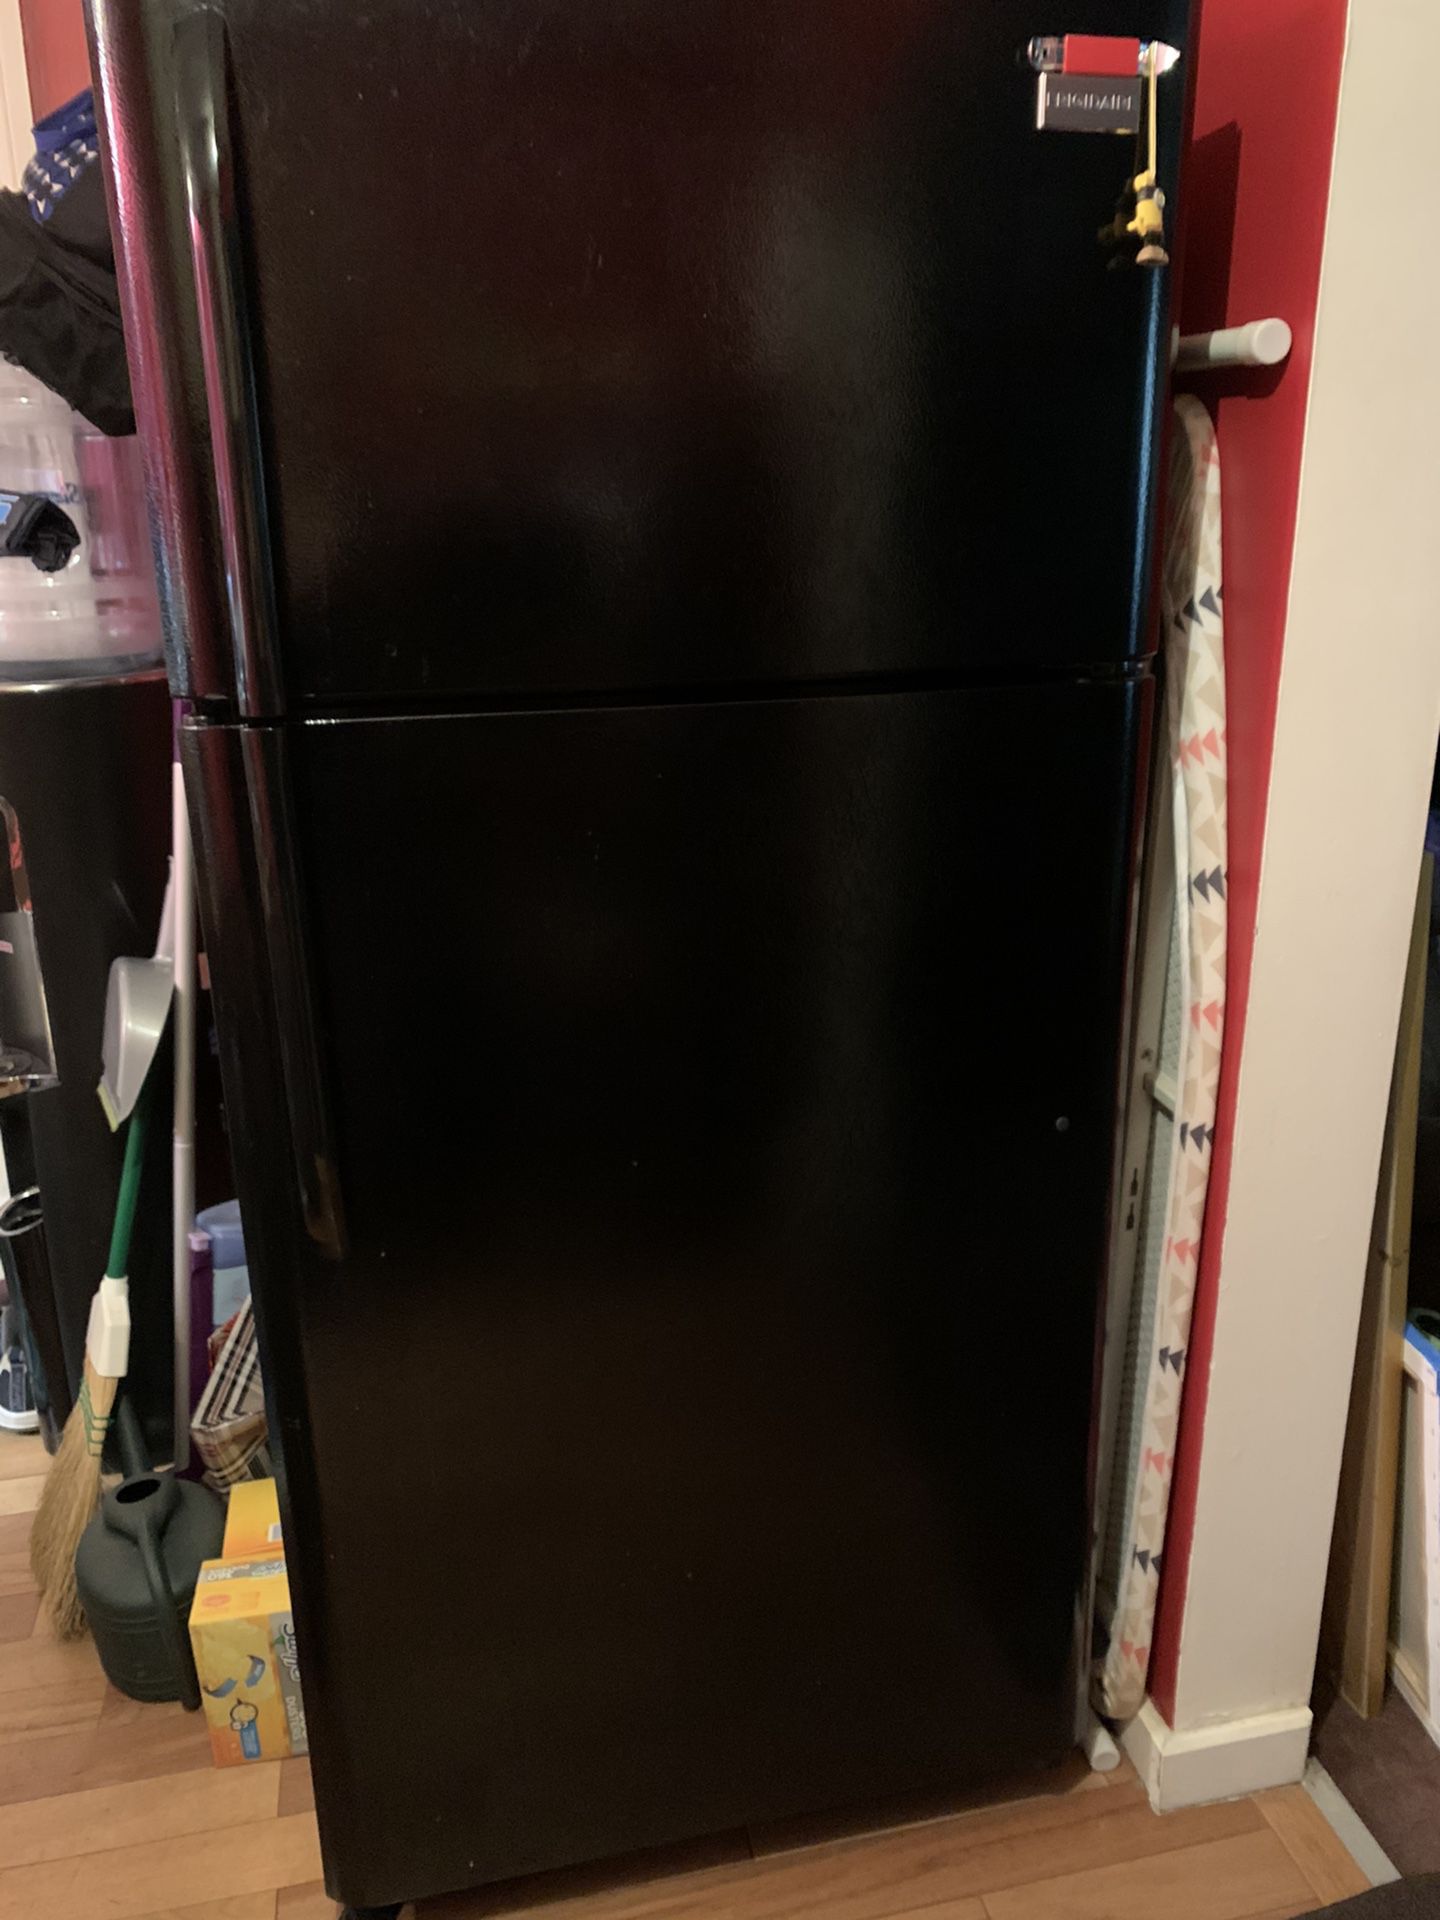 Upright Frigidaire refrigerator in black and a Frigidaire ceramic top stove that is self cleaning and only 4 years old. Minimal wear and tear. They